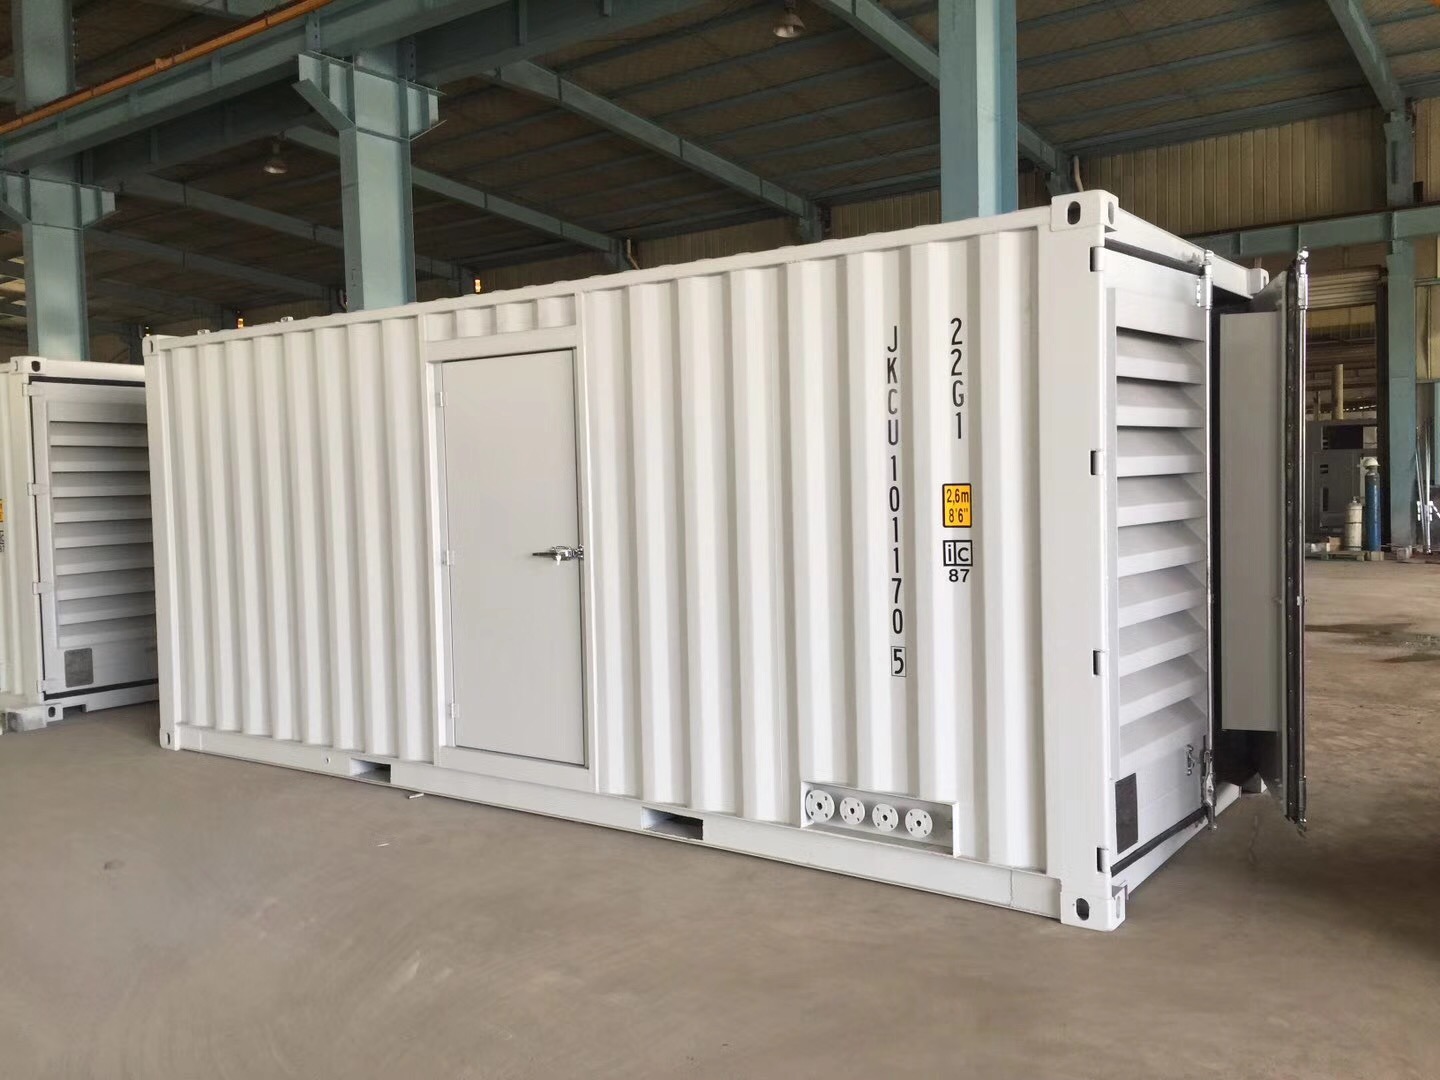 1600kw 2000kVA 2MW Container Containerized Perkins Backup Standby Power Diesel Generator